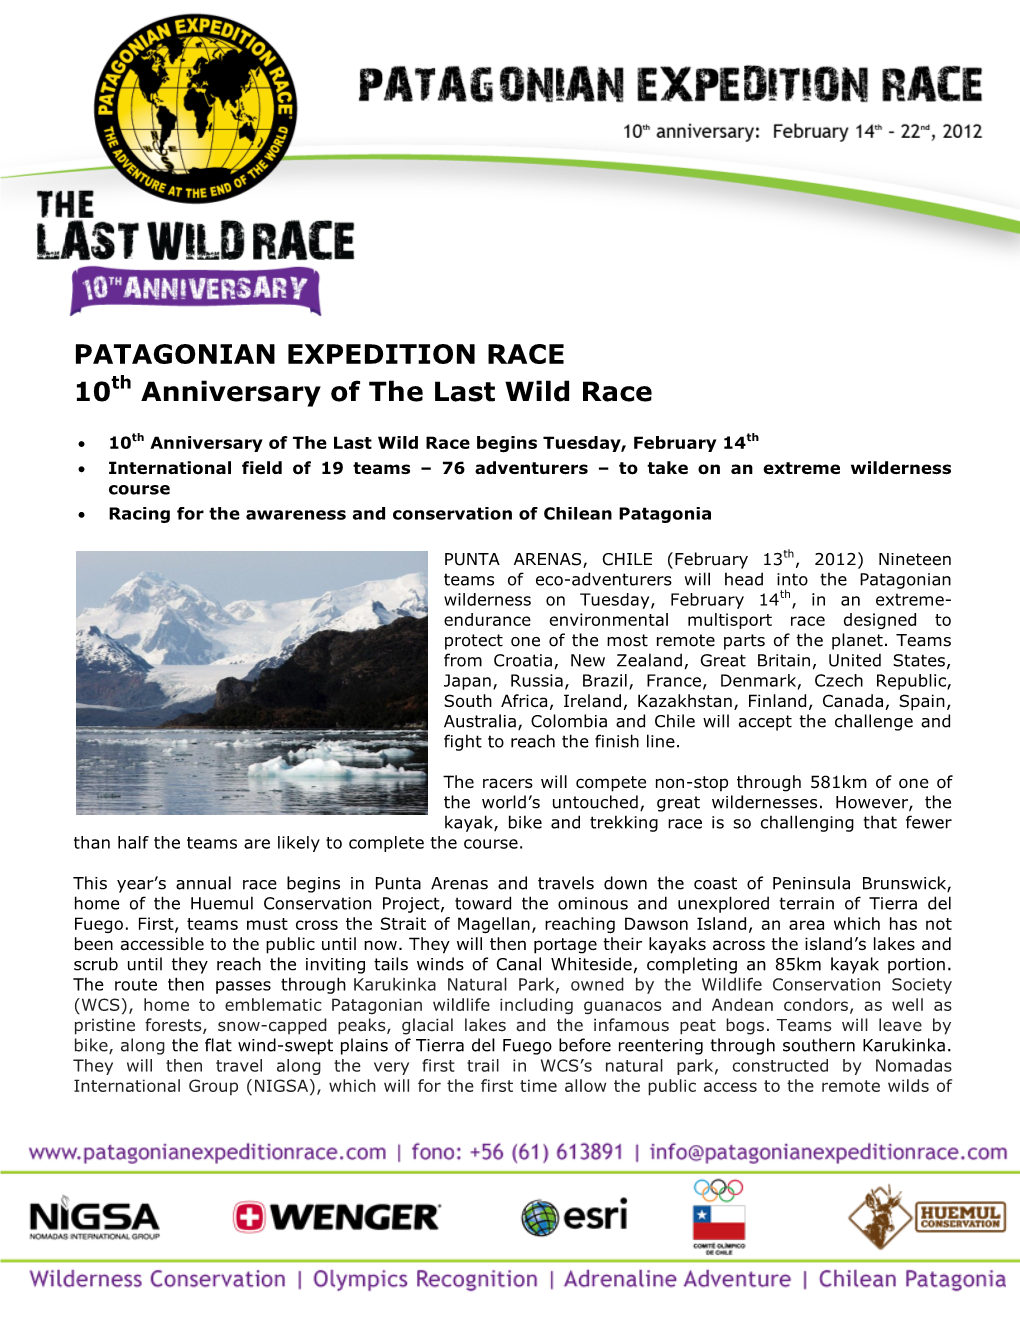 PATAGONIAN EXPEDITION RACE 10Th Anniversary of the Last Wild Race